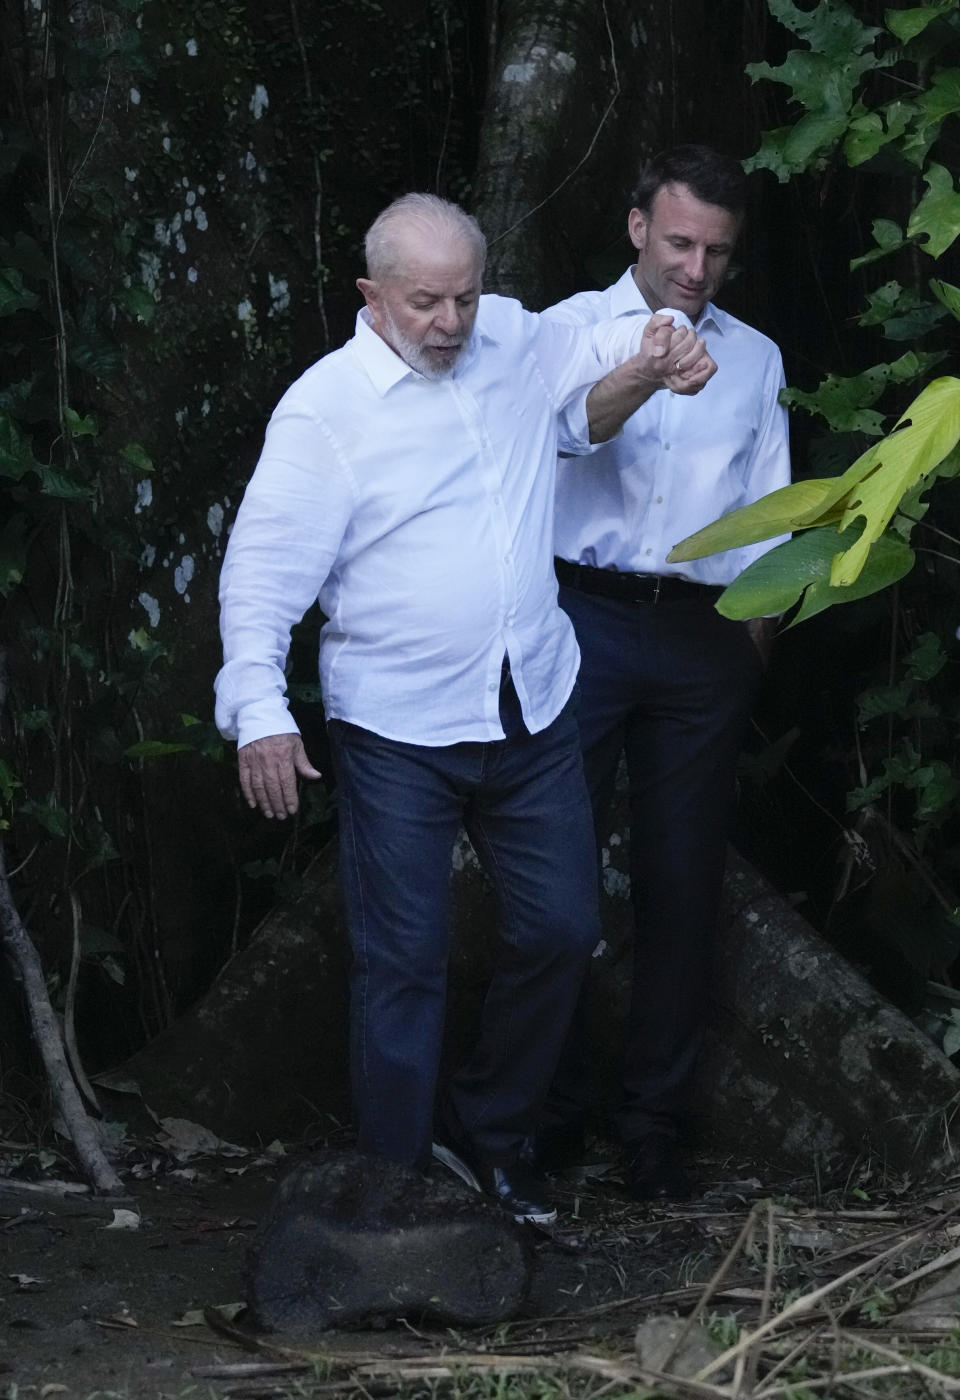 Brazil's President Luiz Inacio Lula da Silva, left, leads French President Emmanuel Macron through an island path as they arrive in Combu, near Belem, Para state, Brazil, Tuesday, March 26, 2024. Macron is on a three-day official visit to Brazil. (AP Photo/Eraldo Peres)